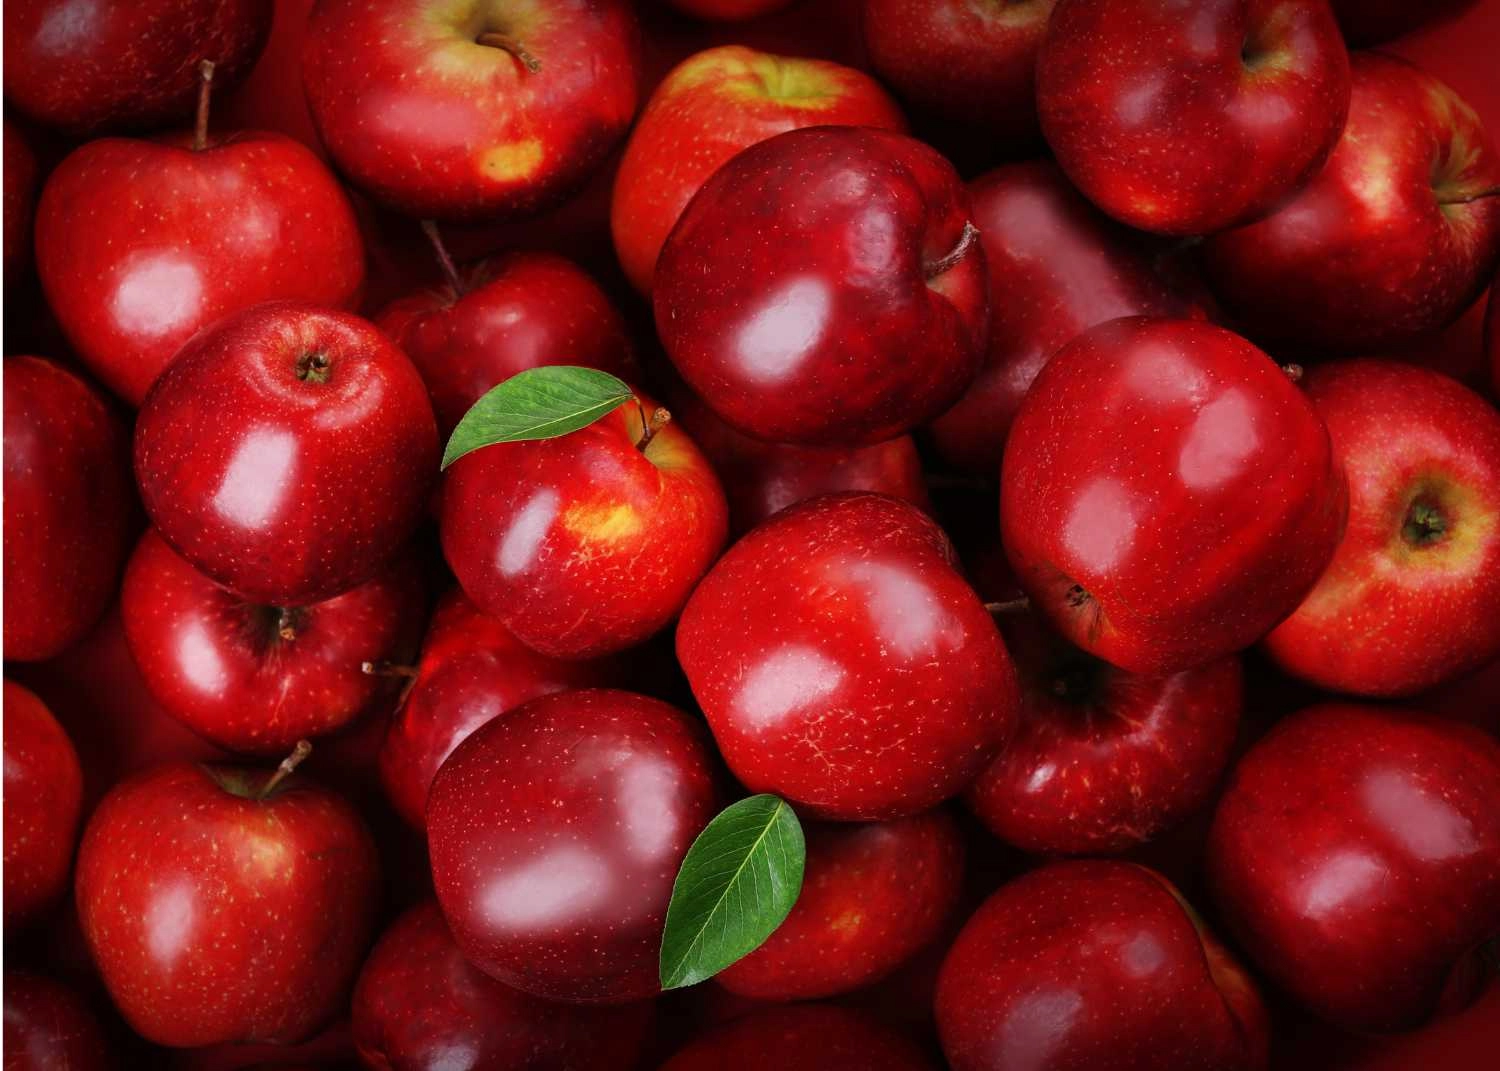 red-delicious-apples-3-lb-bag